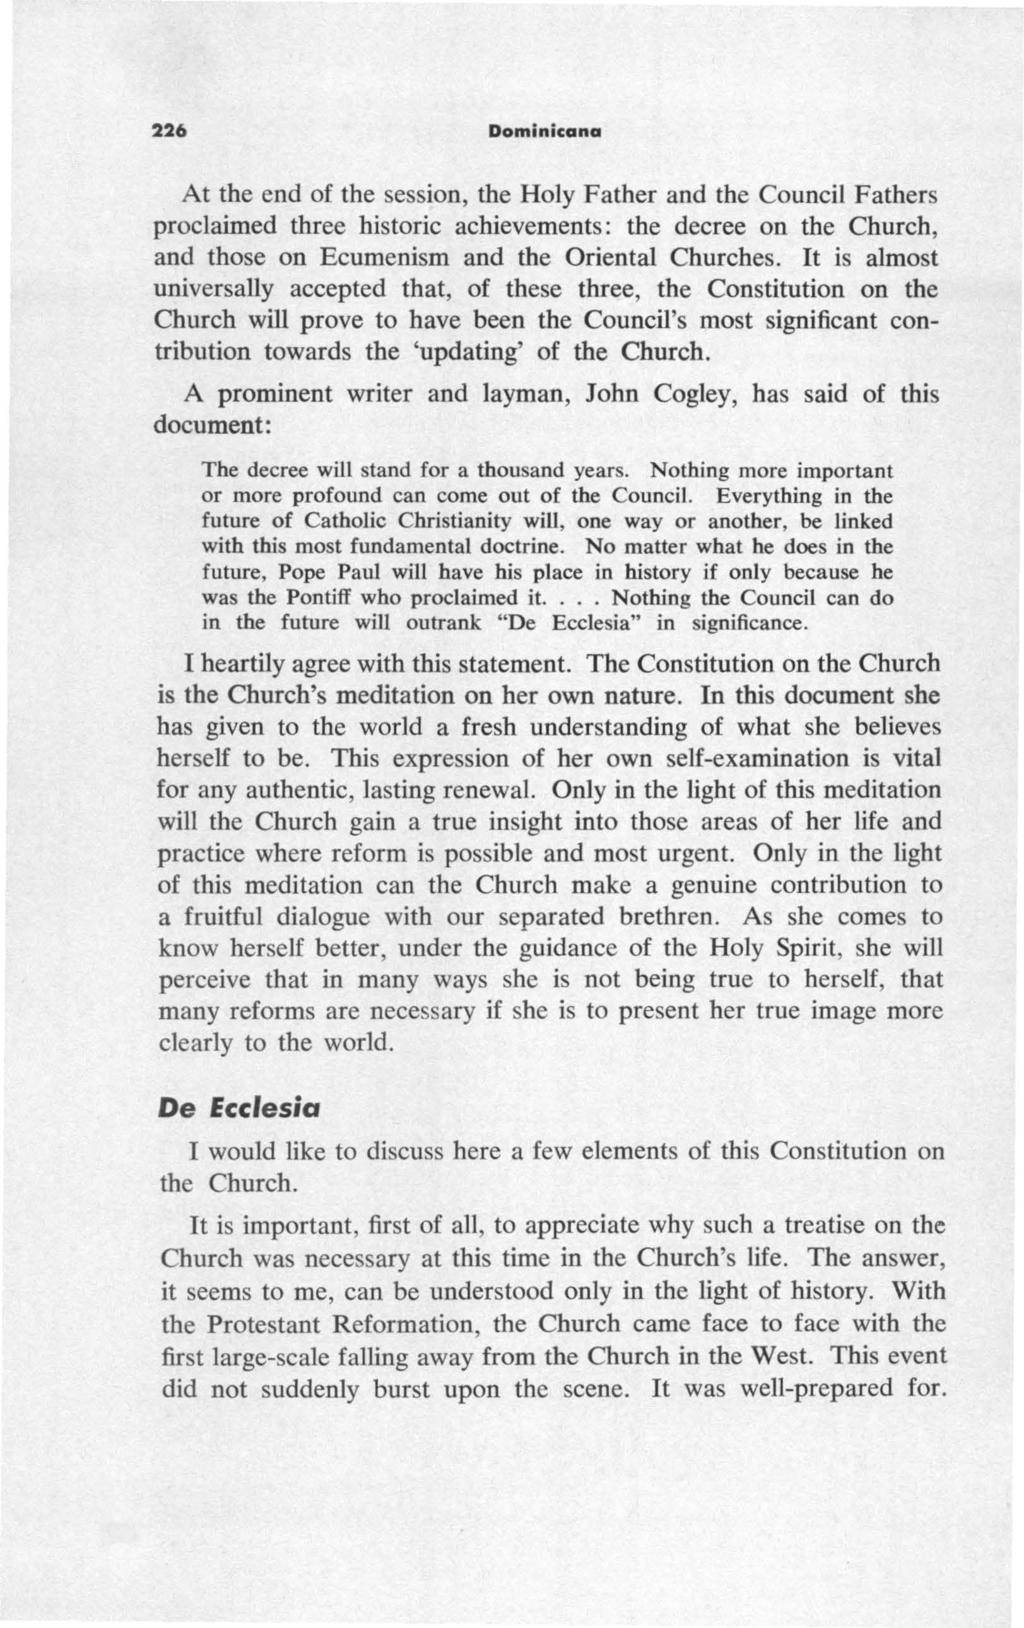 226 Dominicana At the end of the session, the Holy Father and the Council Fathers proclaimed three historic achievements: the decree on the Church, and those on Ecumenism and the Oriental Churches.